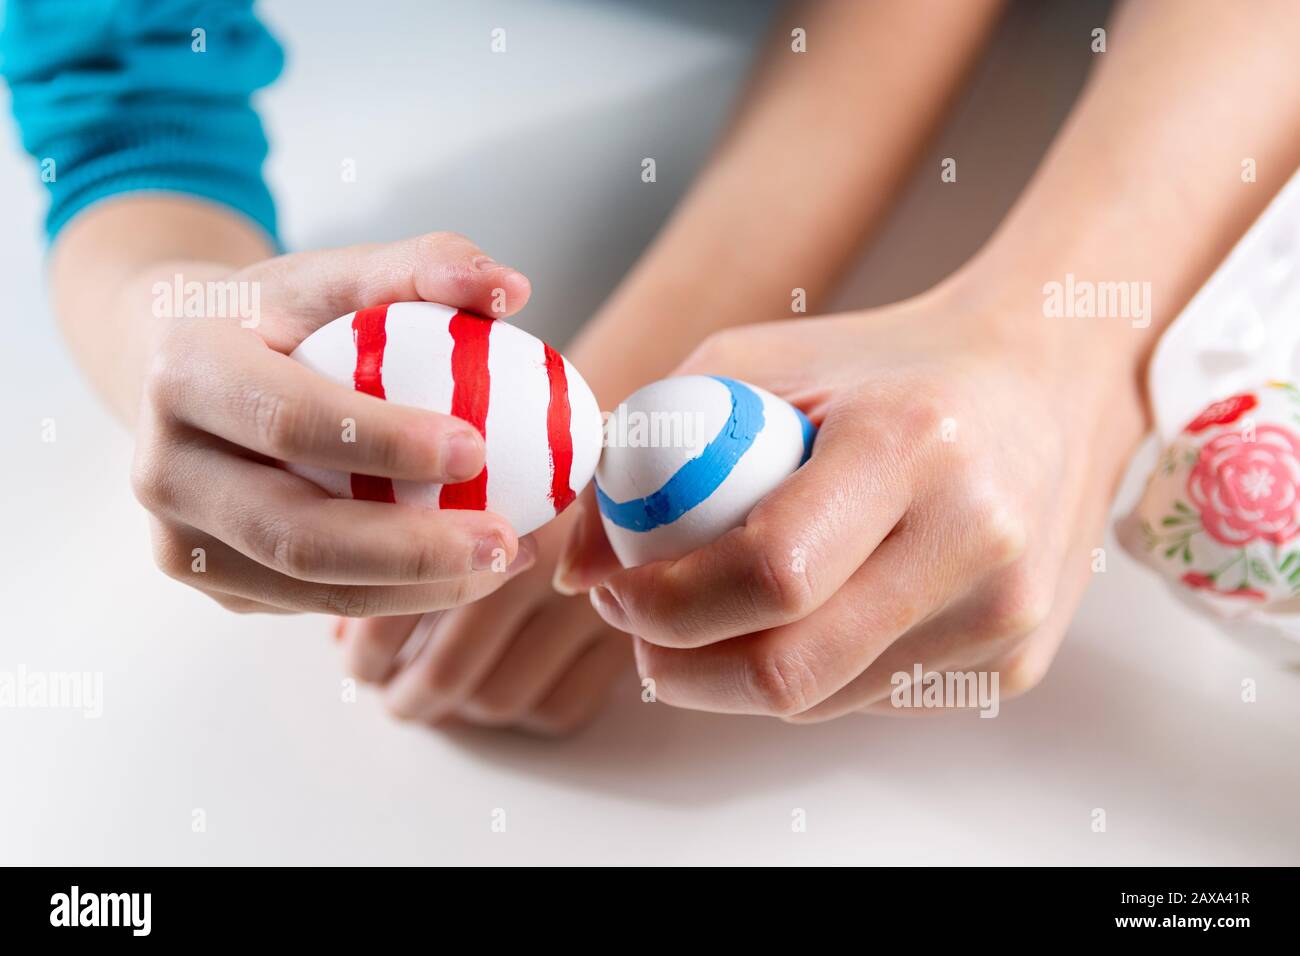 Child hands with colored Easter eggs knocking. Ready for egg tapping indoor at home. Happy Easter orthodox holiday and ritual concept. Close up Stock Photo